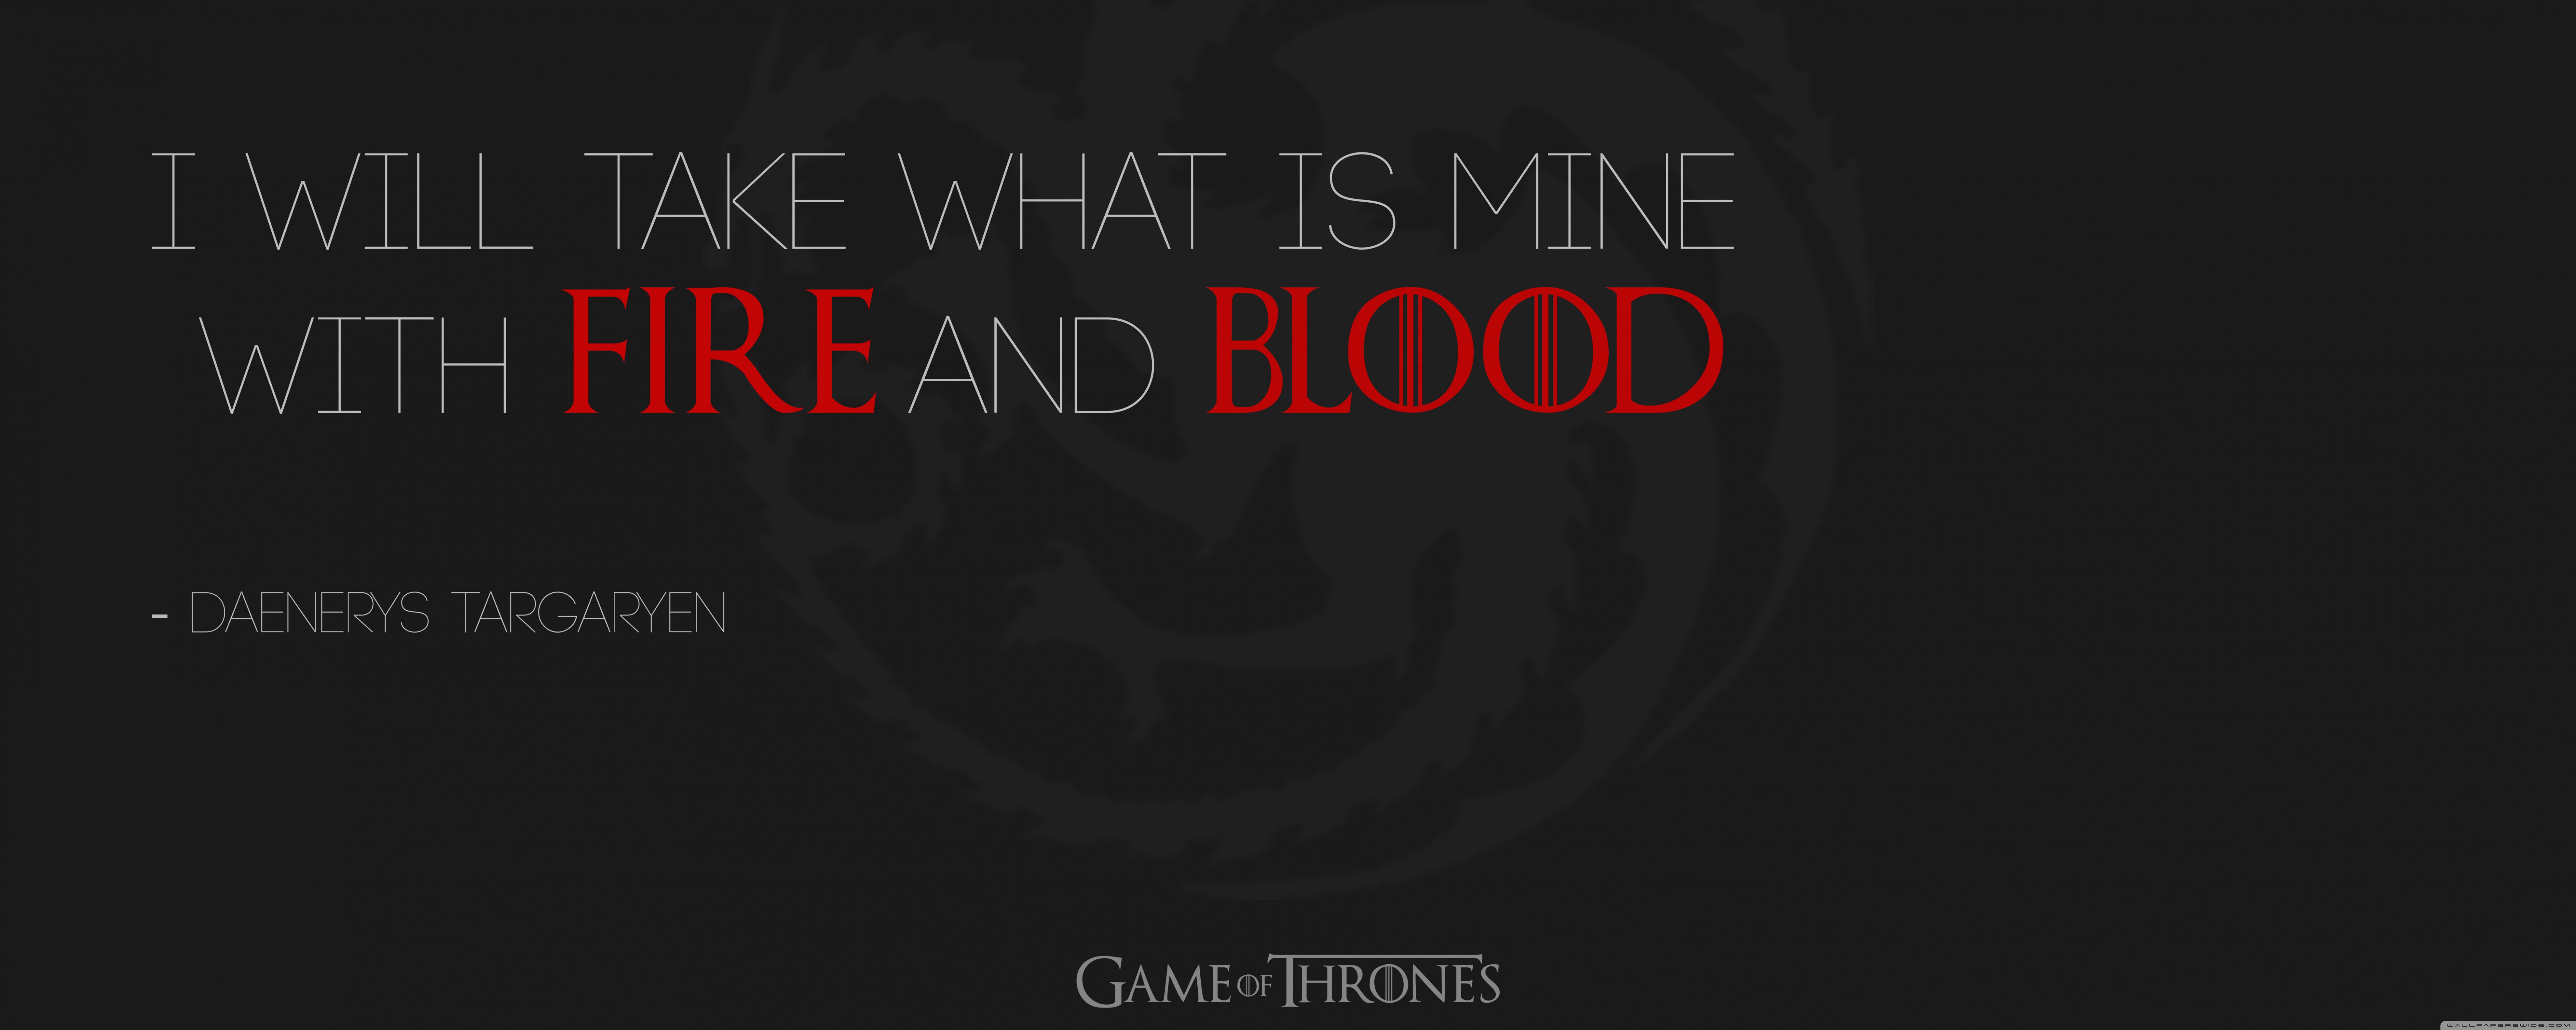 game_of_thrones_quote-wallpaper-7500x3000.jpg